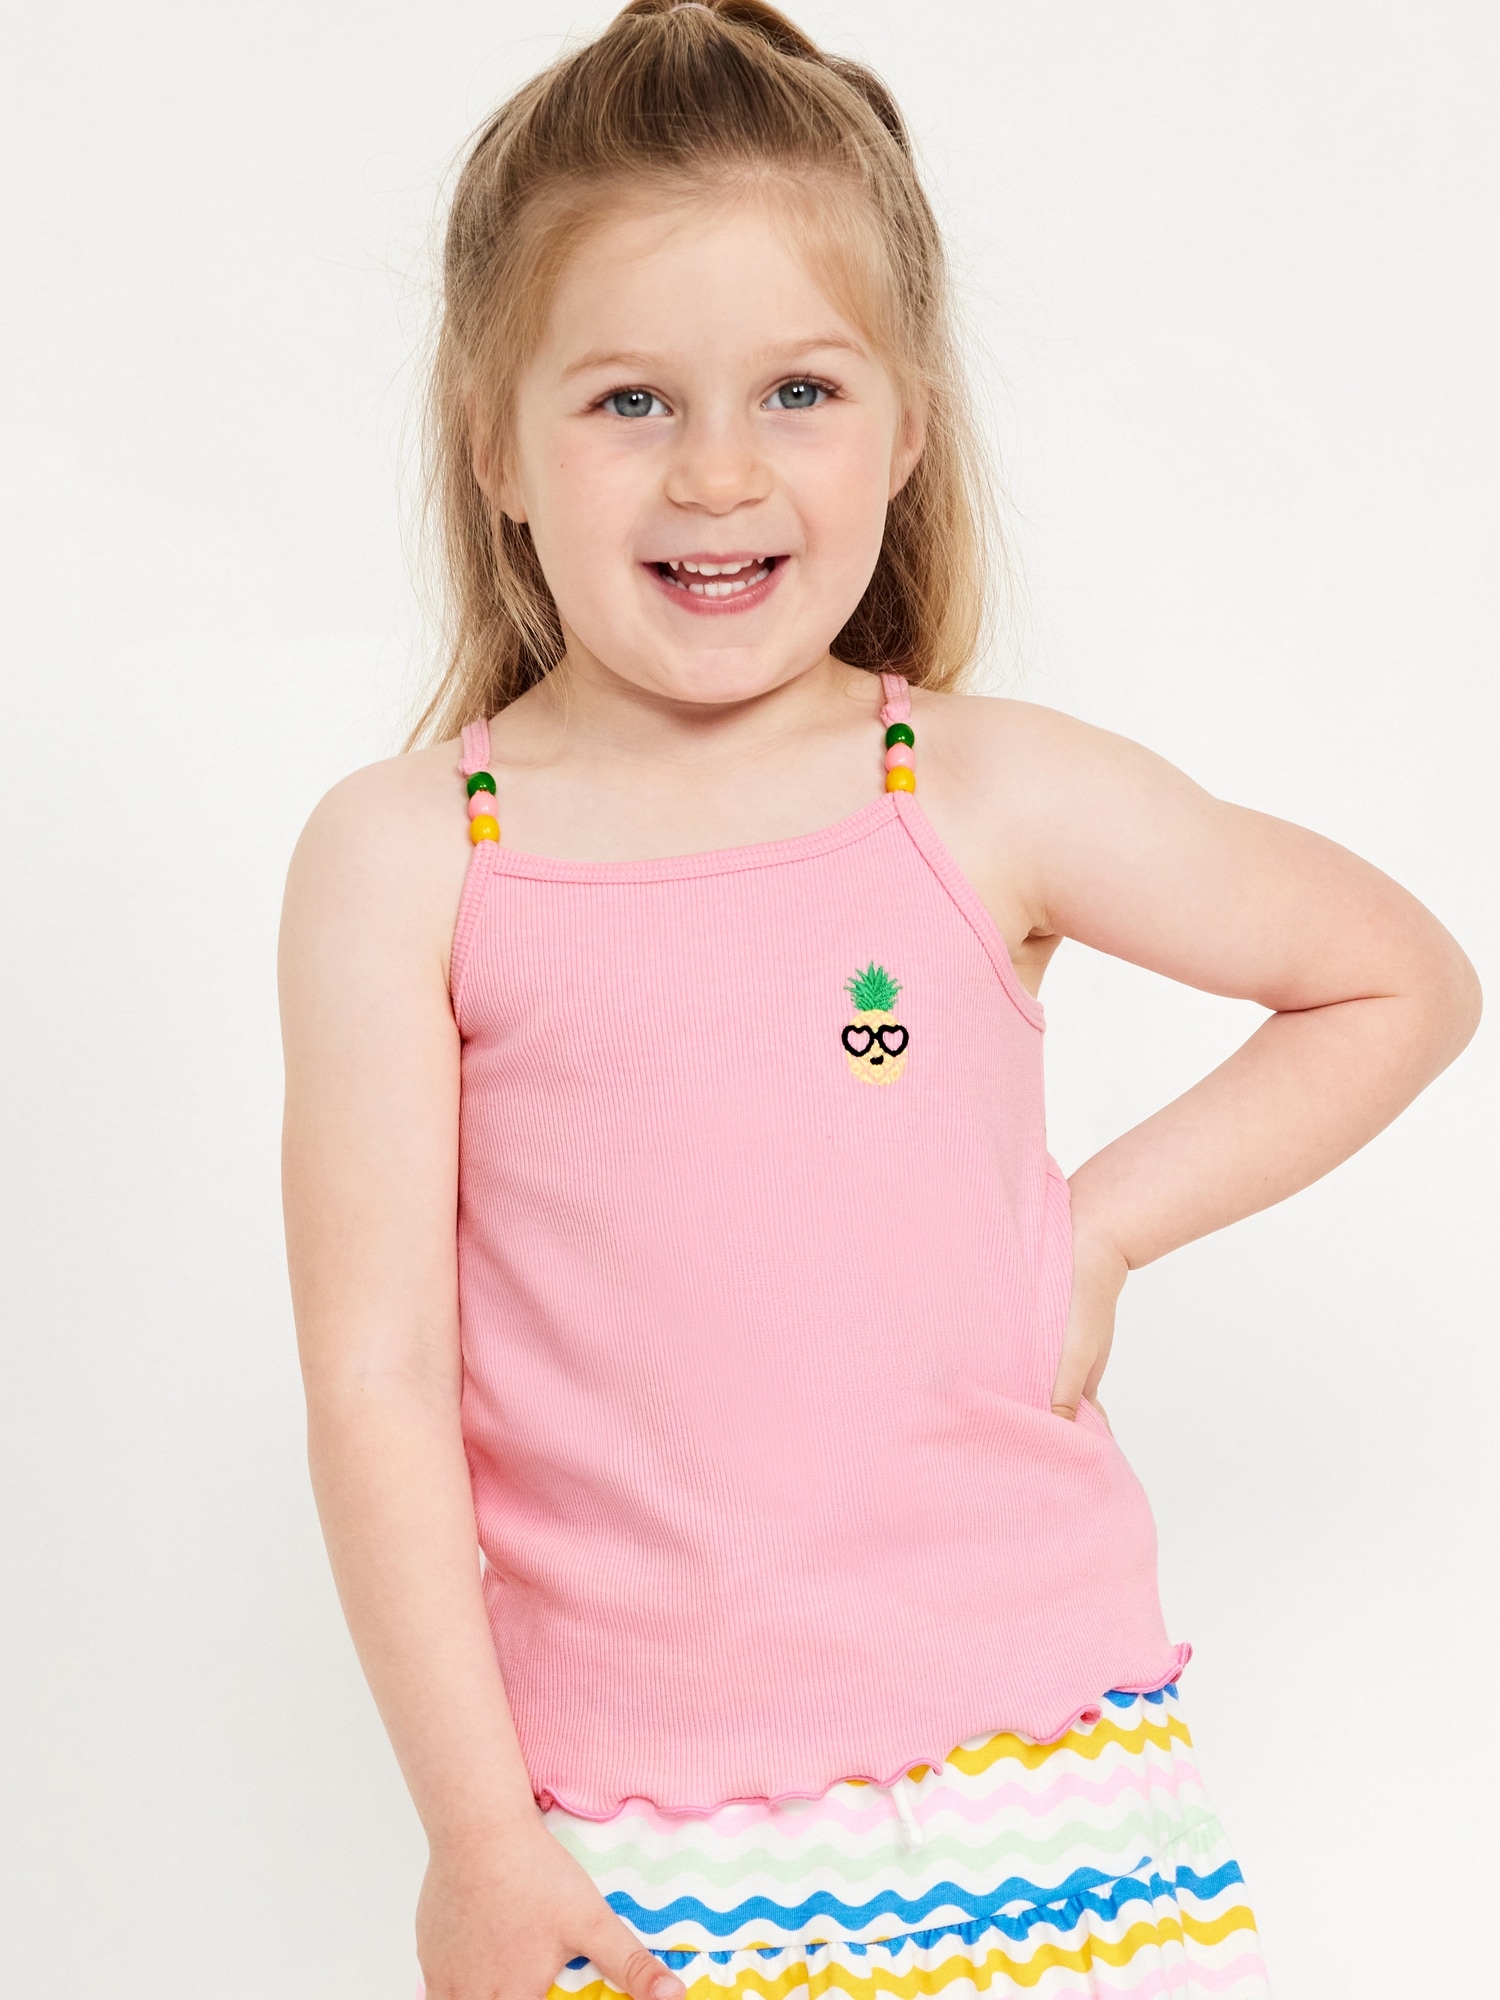 Beaded-Strap Cami Top for Toddler Girls